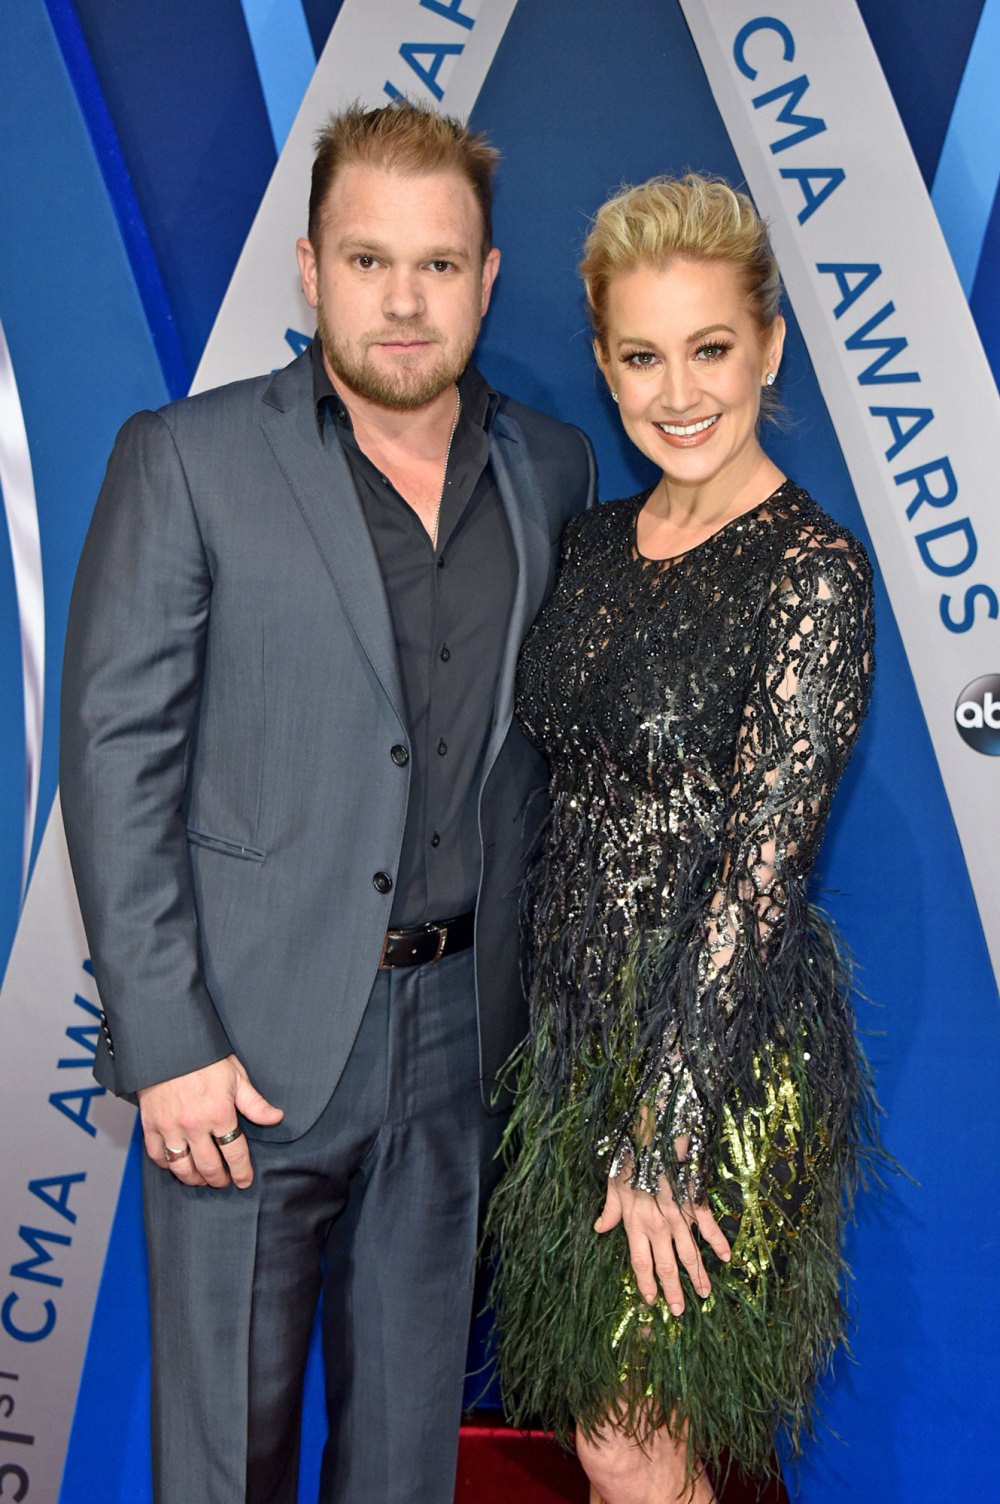 Kellie Pickler’s Late Husband Kyle Jacobs Honored in Private Ceremony ...